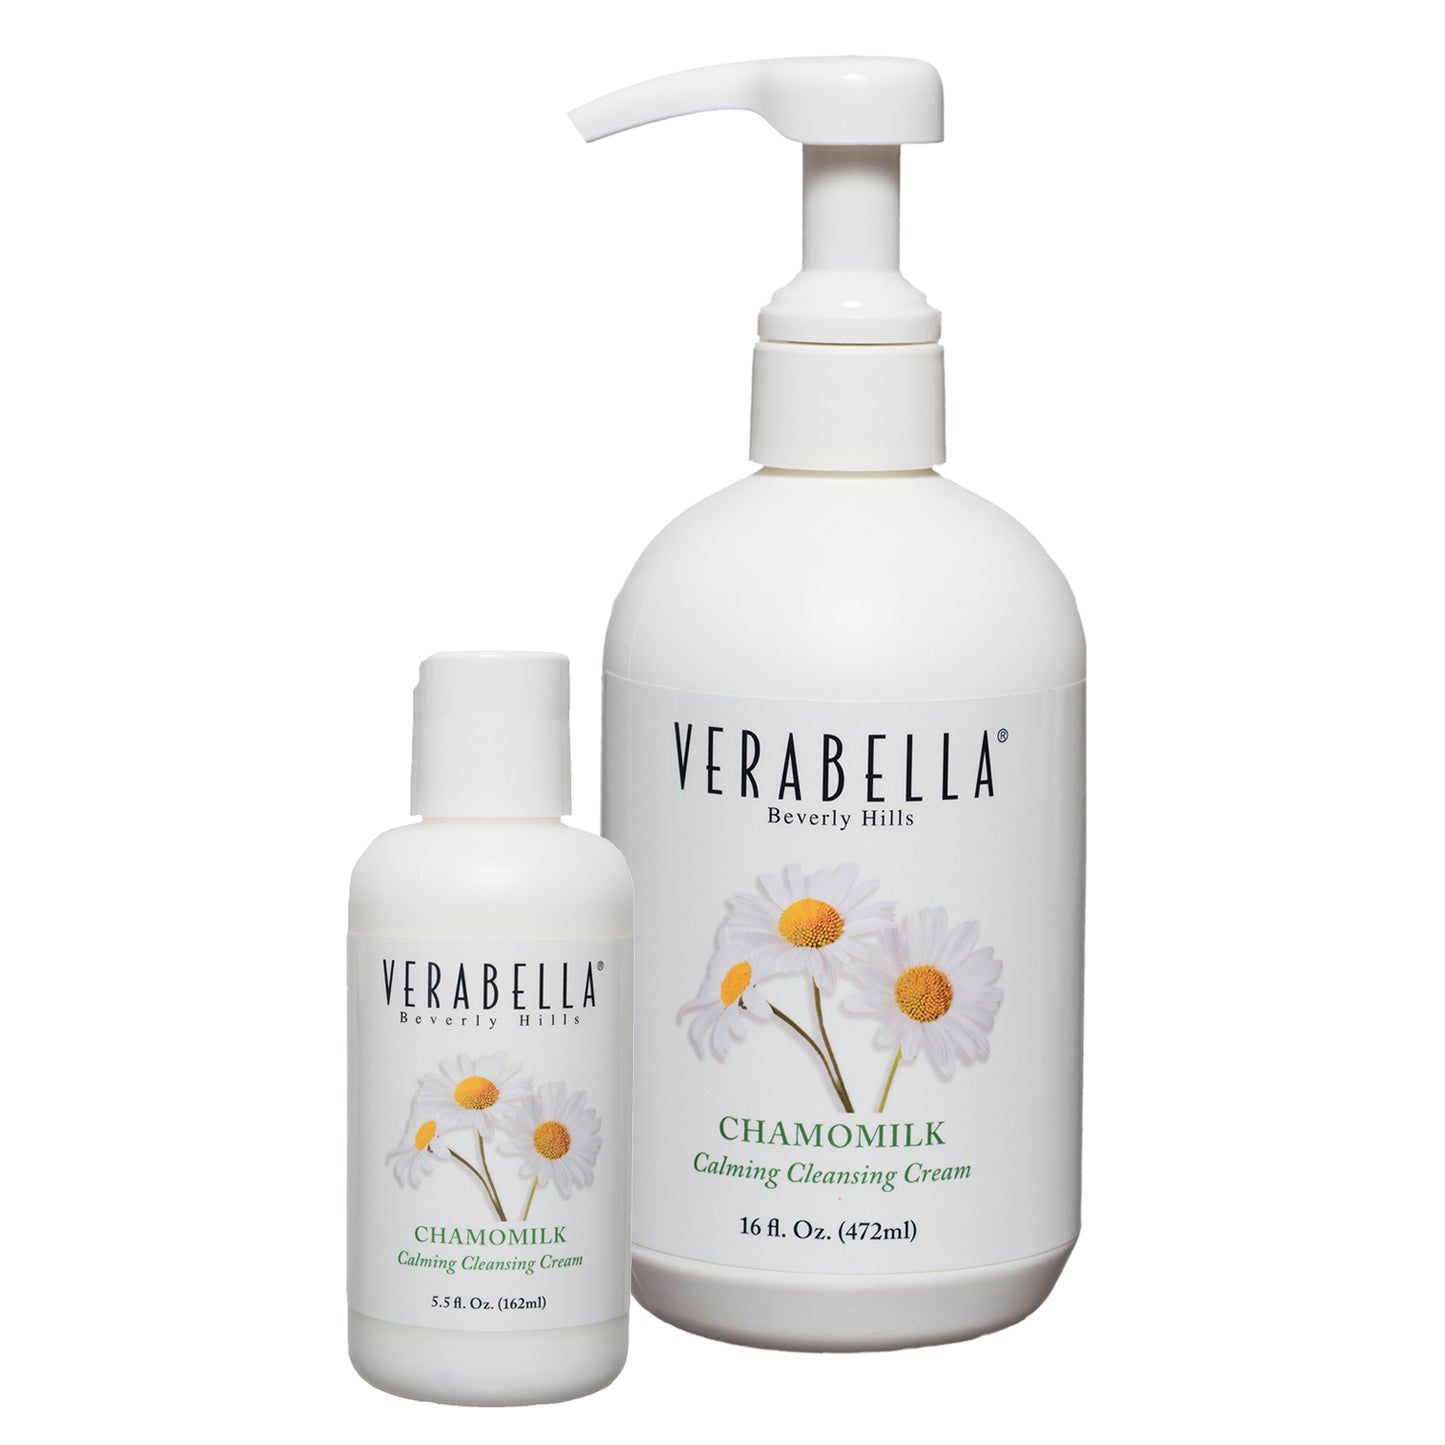 Verabella Chamomilk Calming Cleansing Cream small and large - call for details